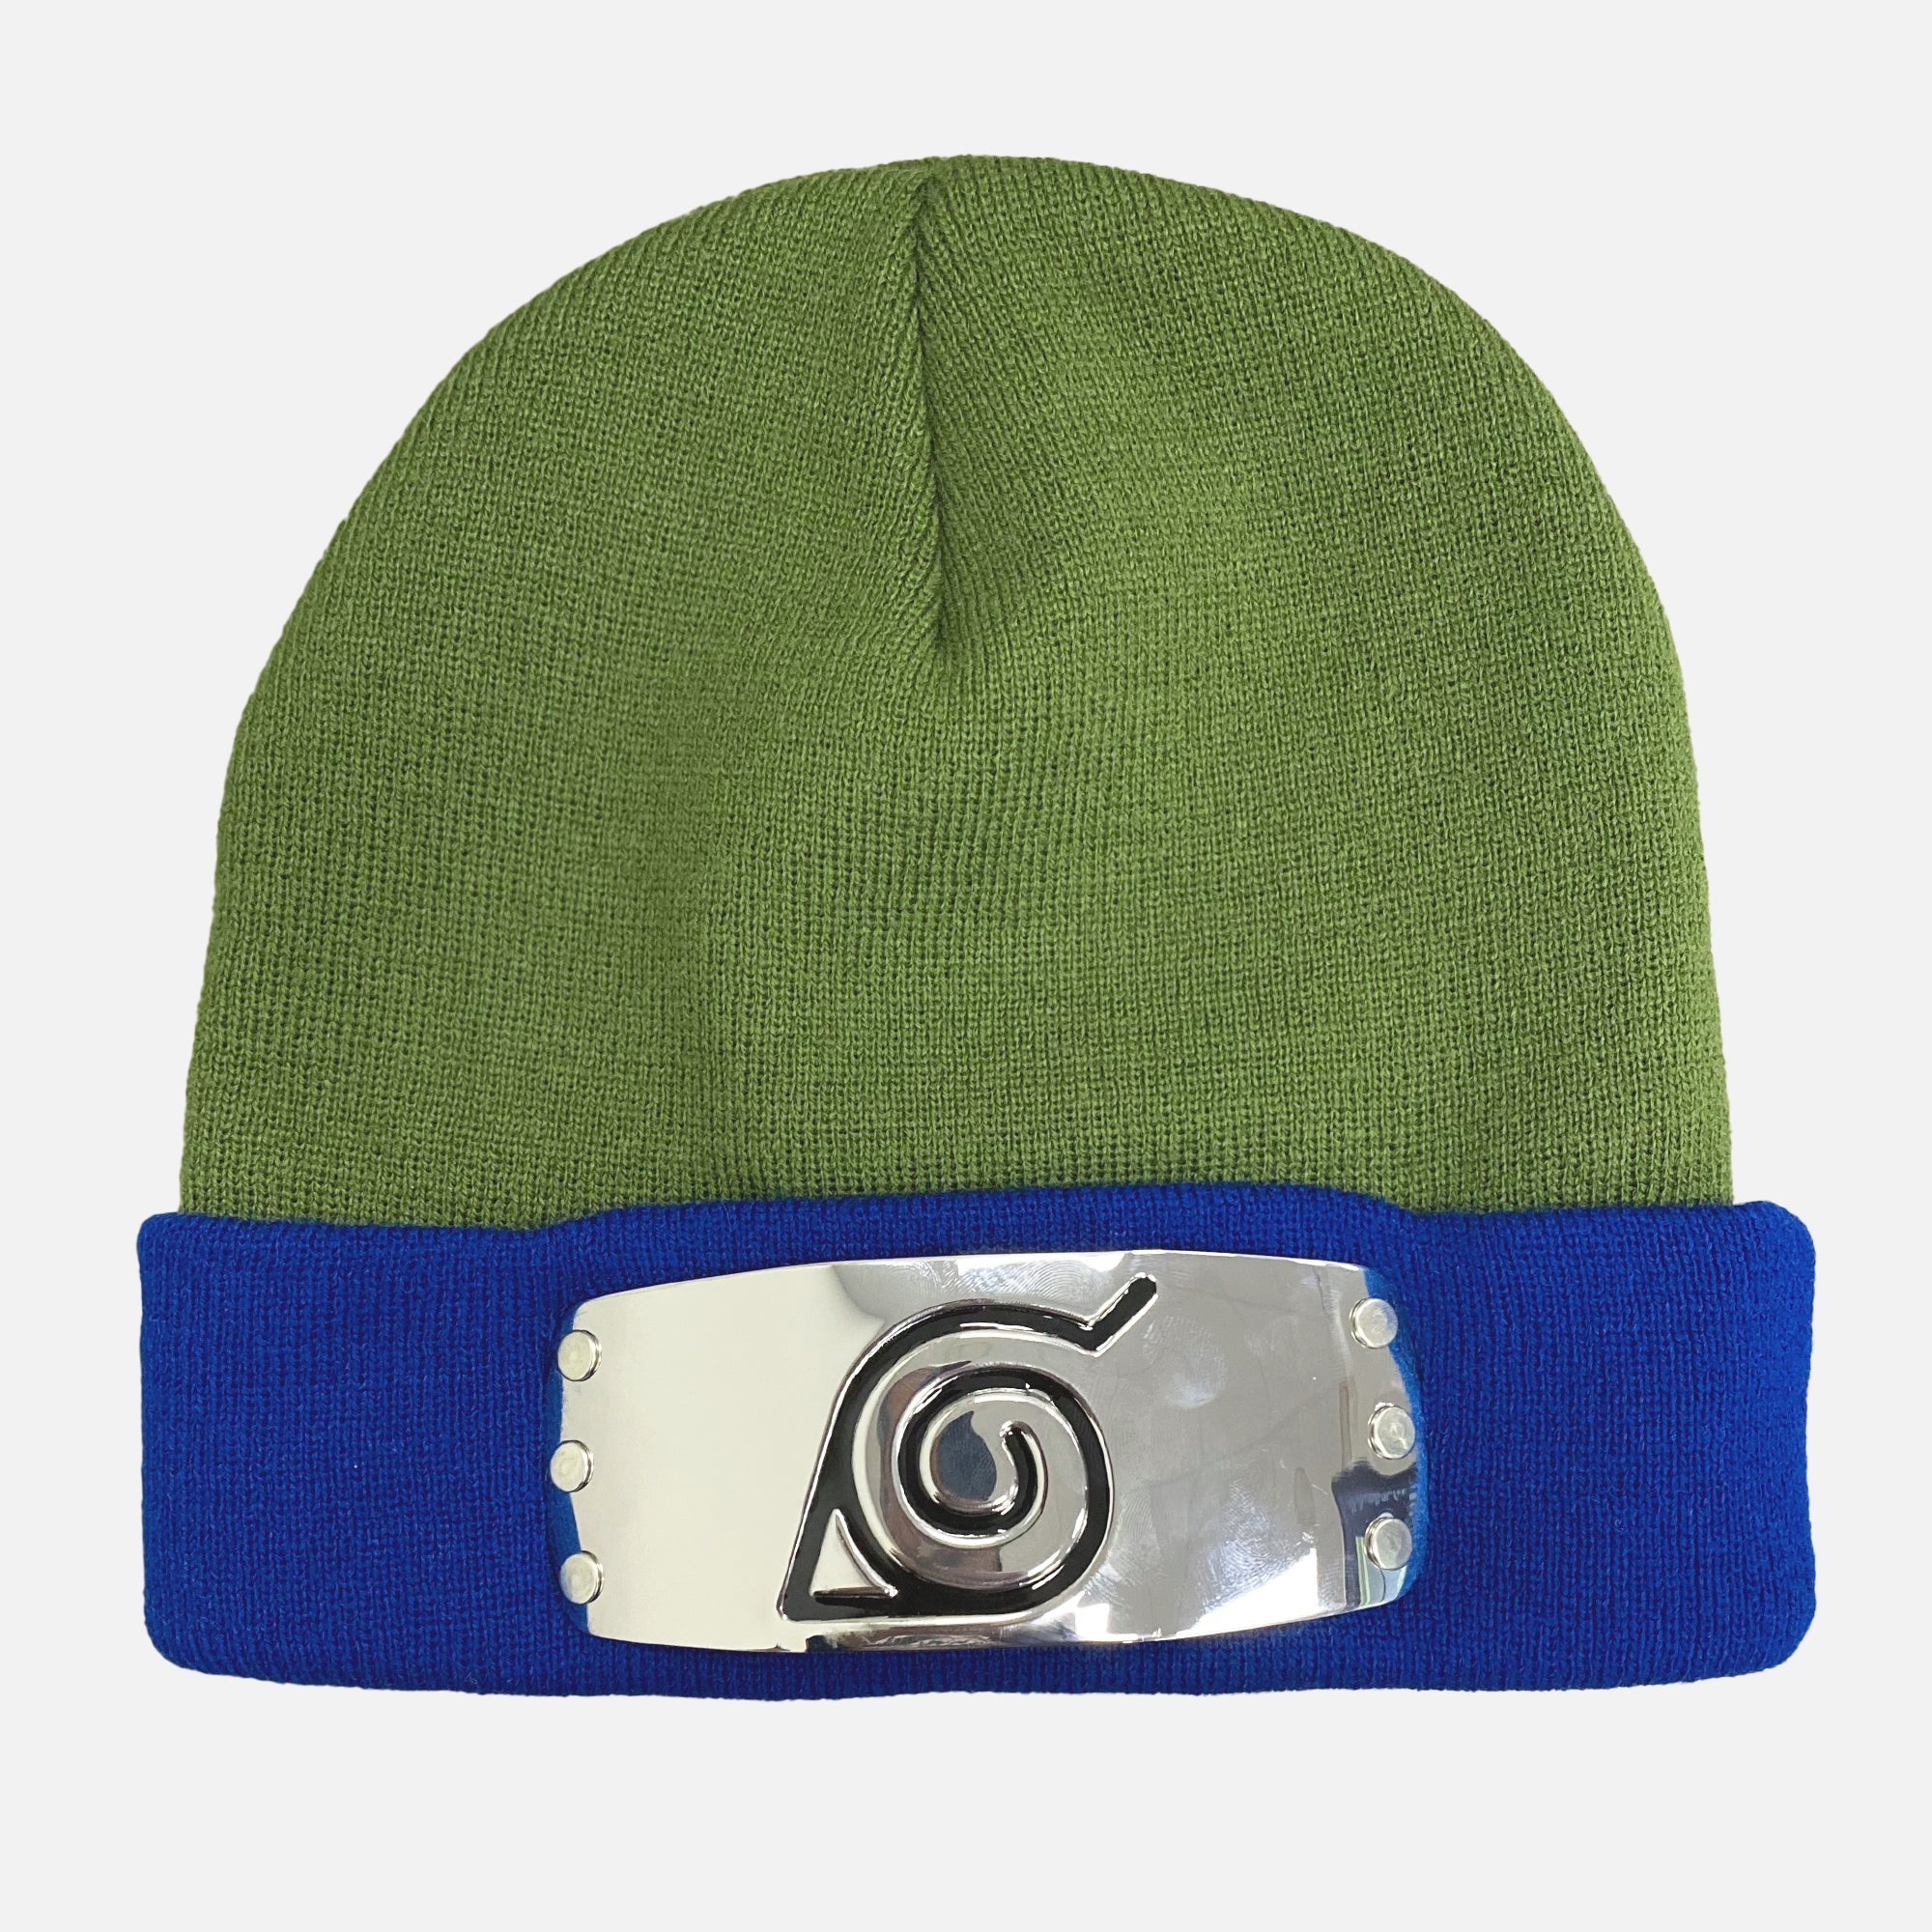 Naruto Shippuden - Hidden Leaf Forehead Protector Beanie image count 0